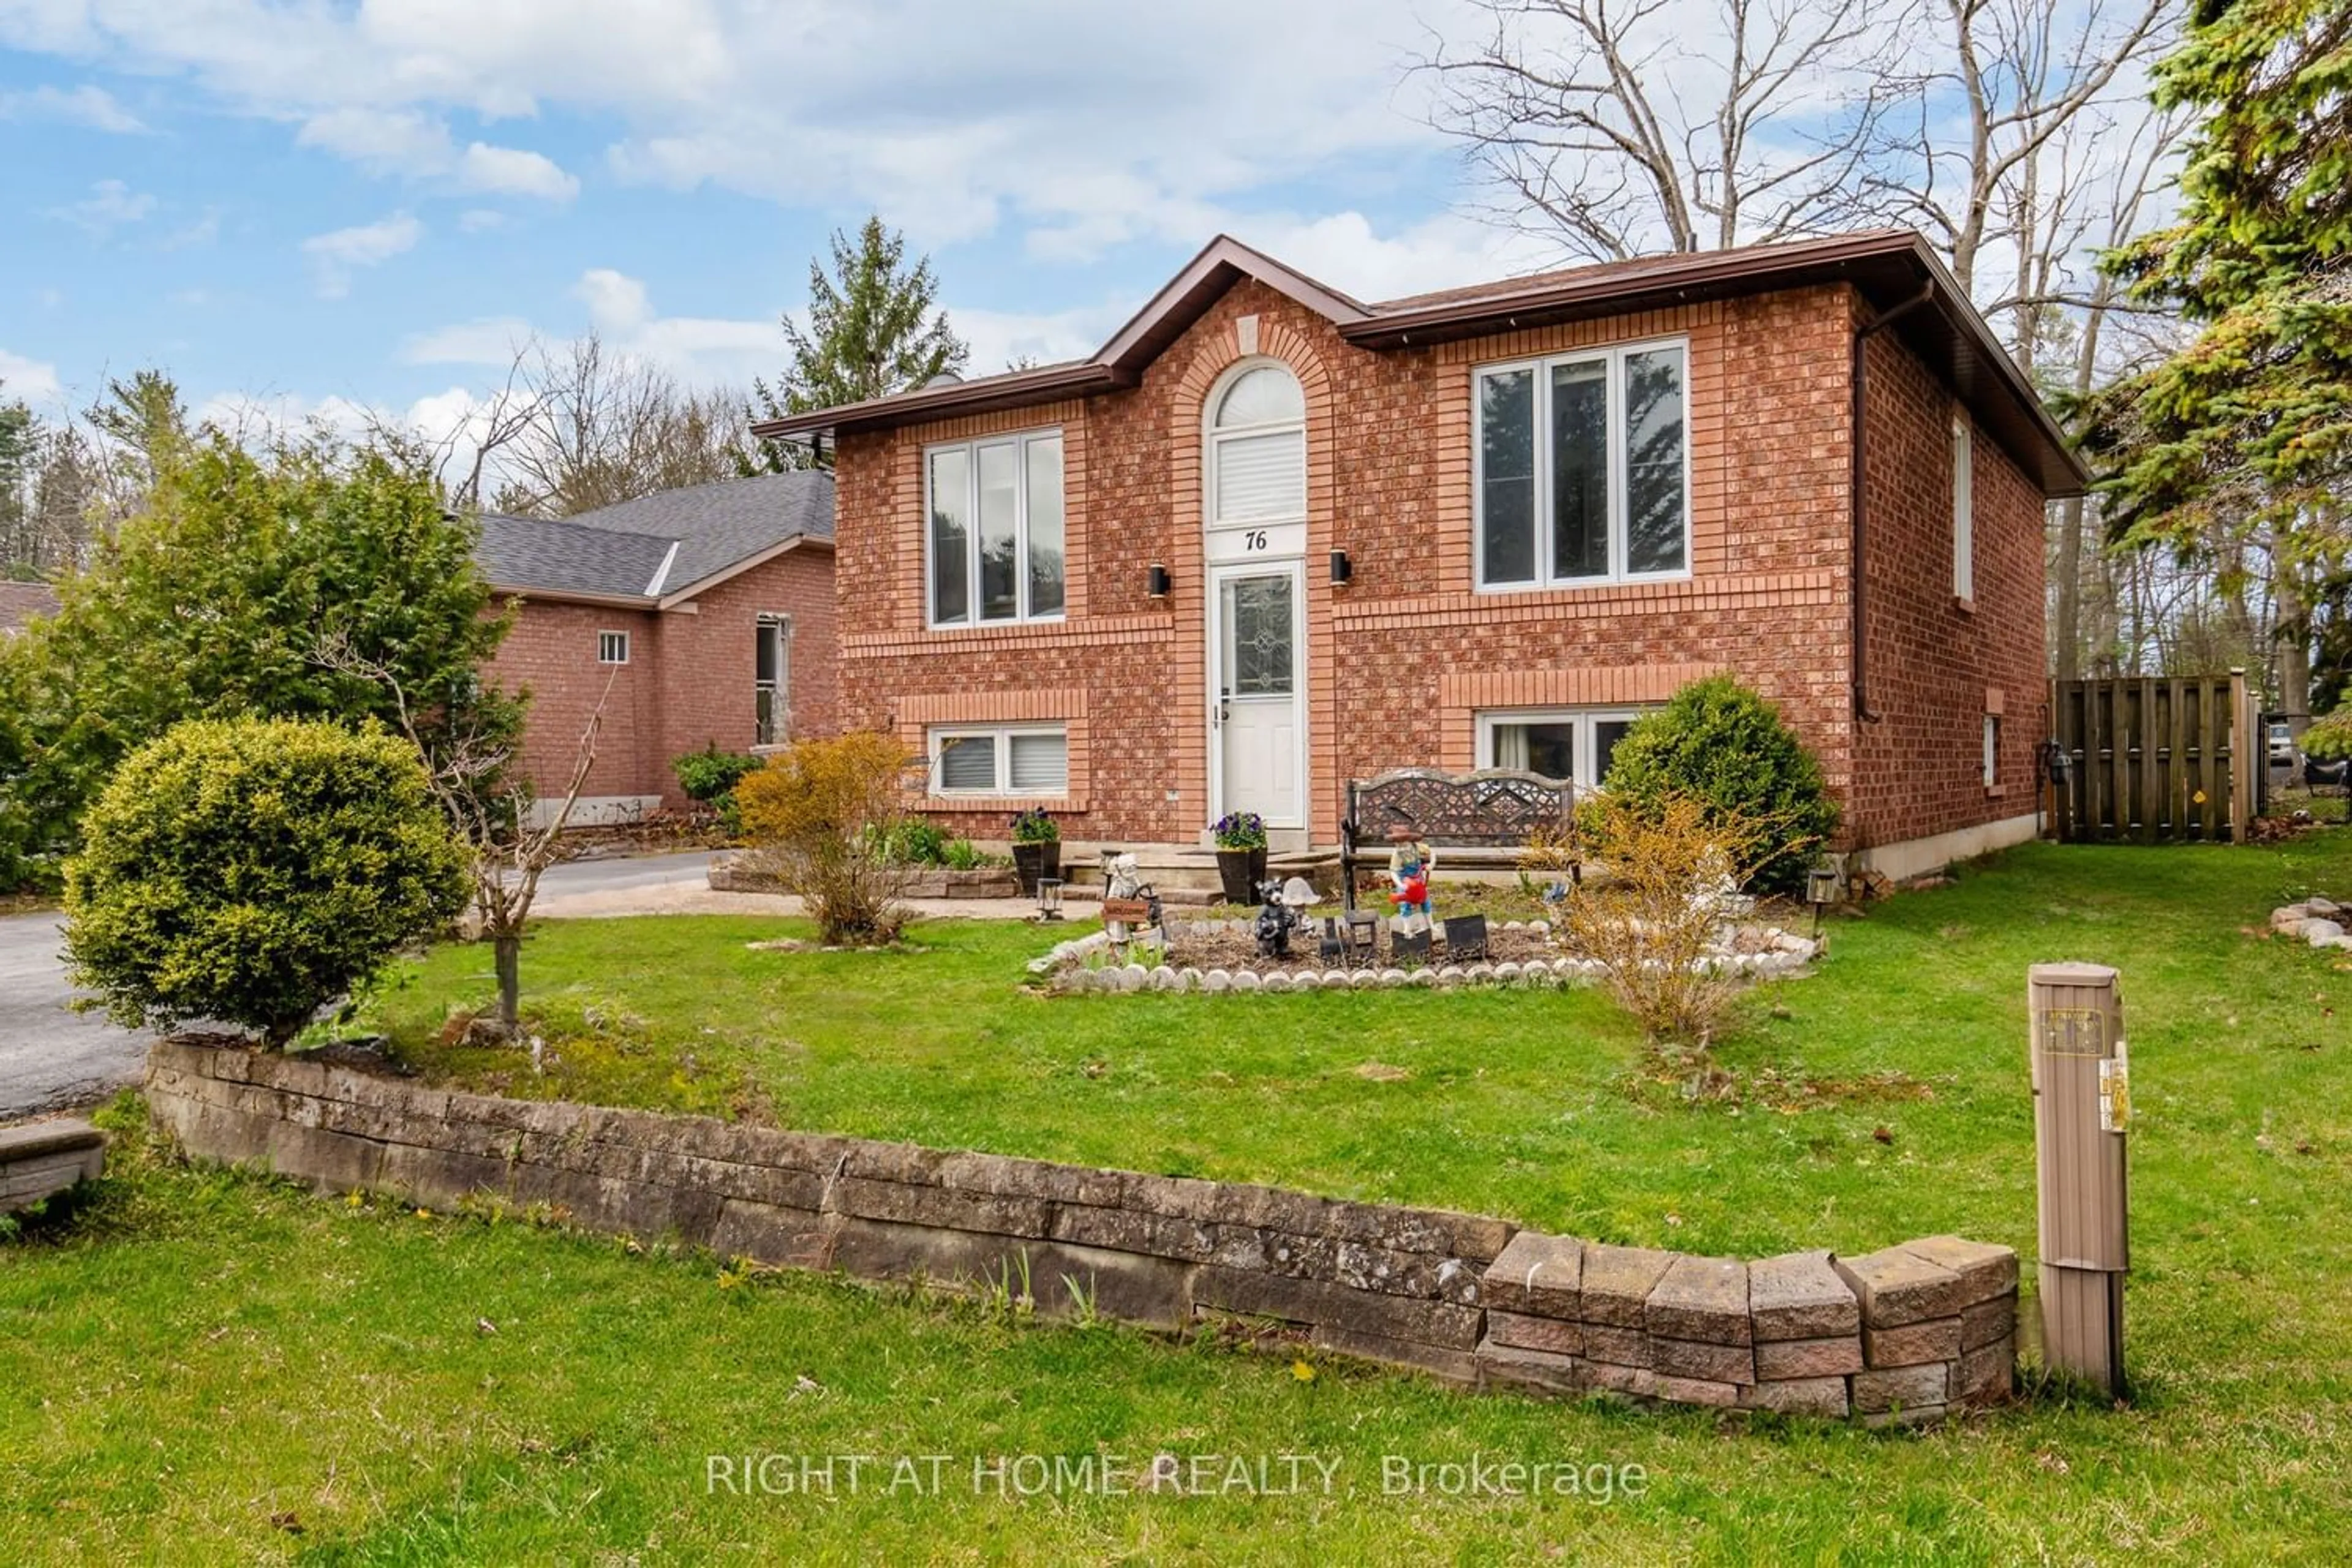 Home with brick exterior material for 76 Leo Blvd, Wasaga Beach Ontario L9Z 1C5